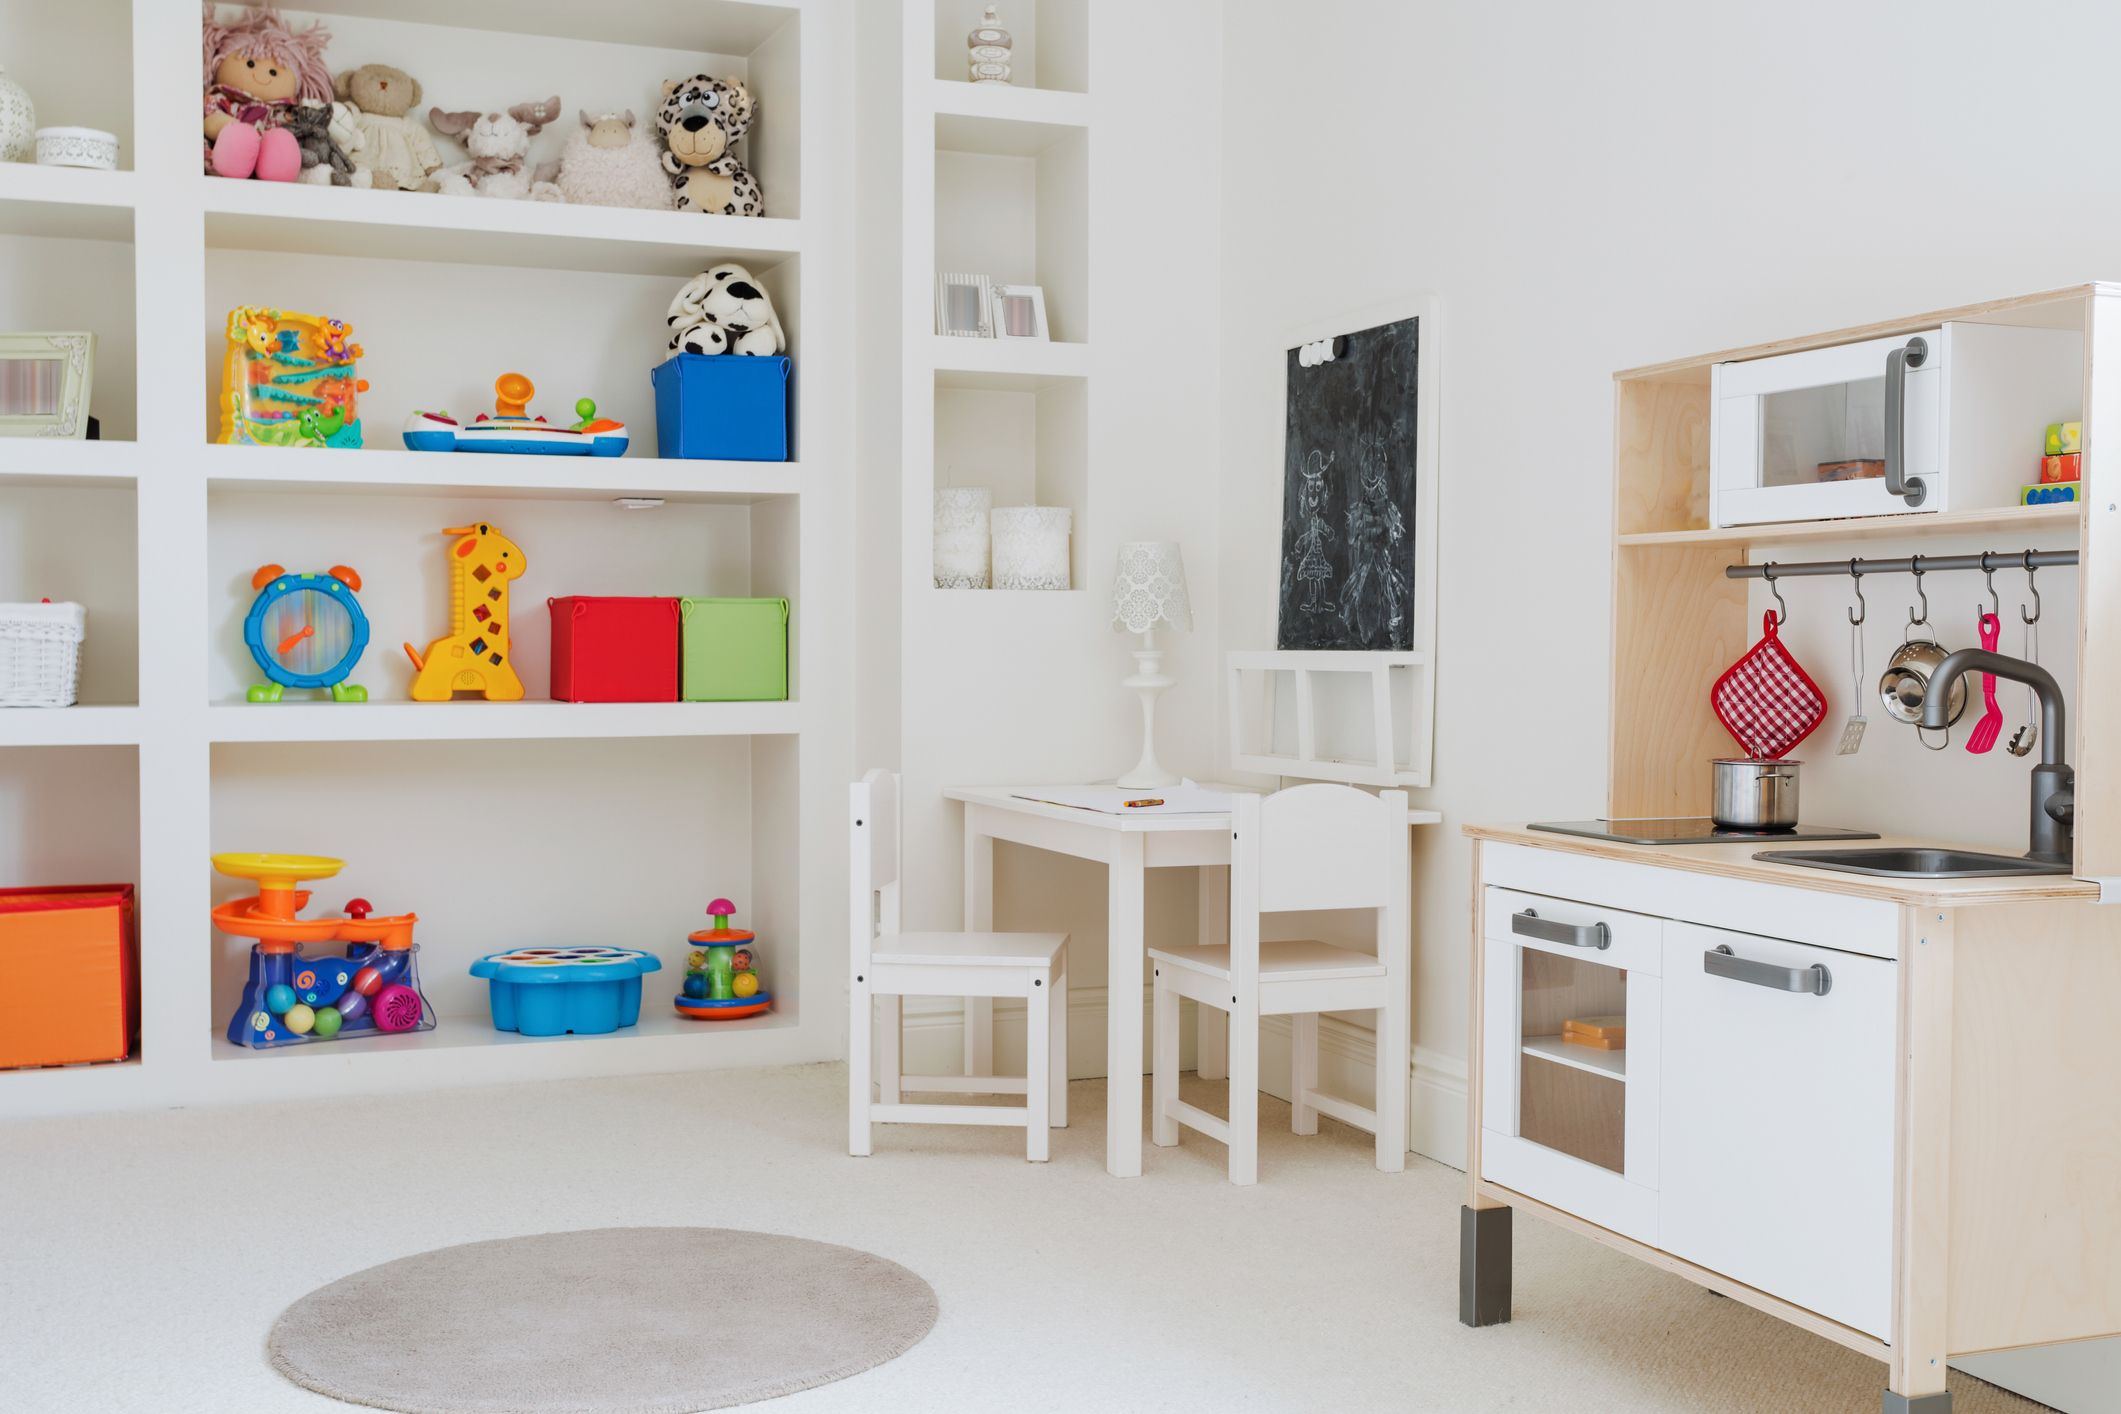 Kids Room Storage & Organization Ideas for Toys, Clothes, & More!